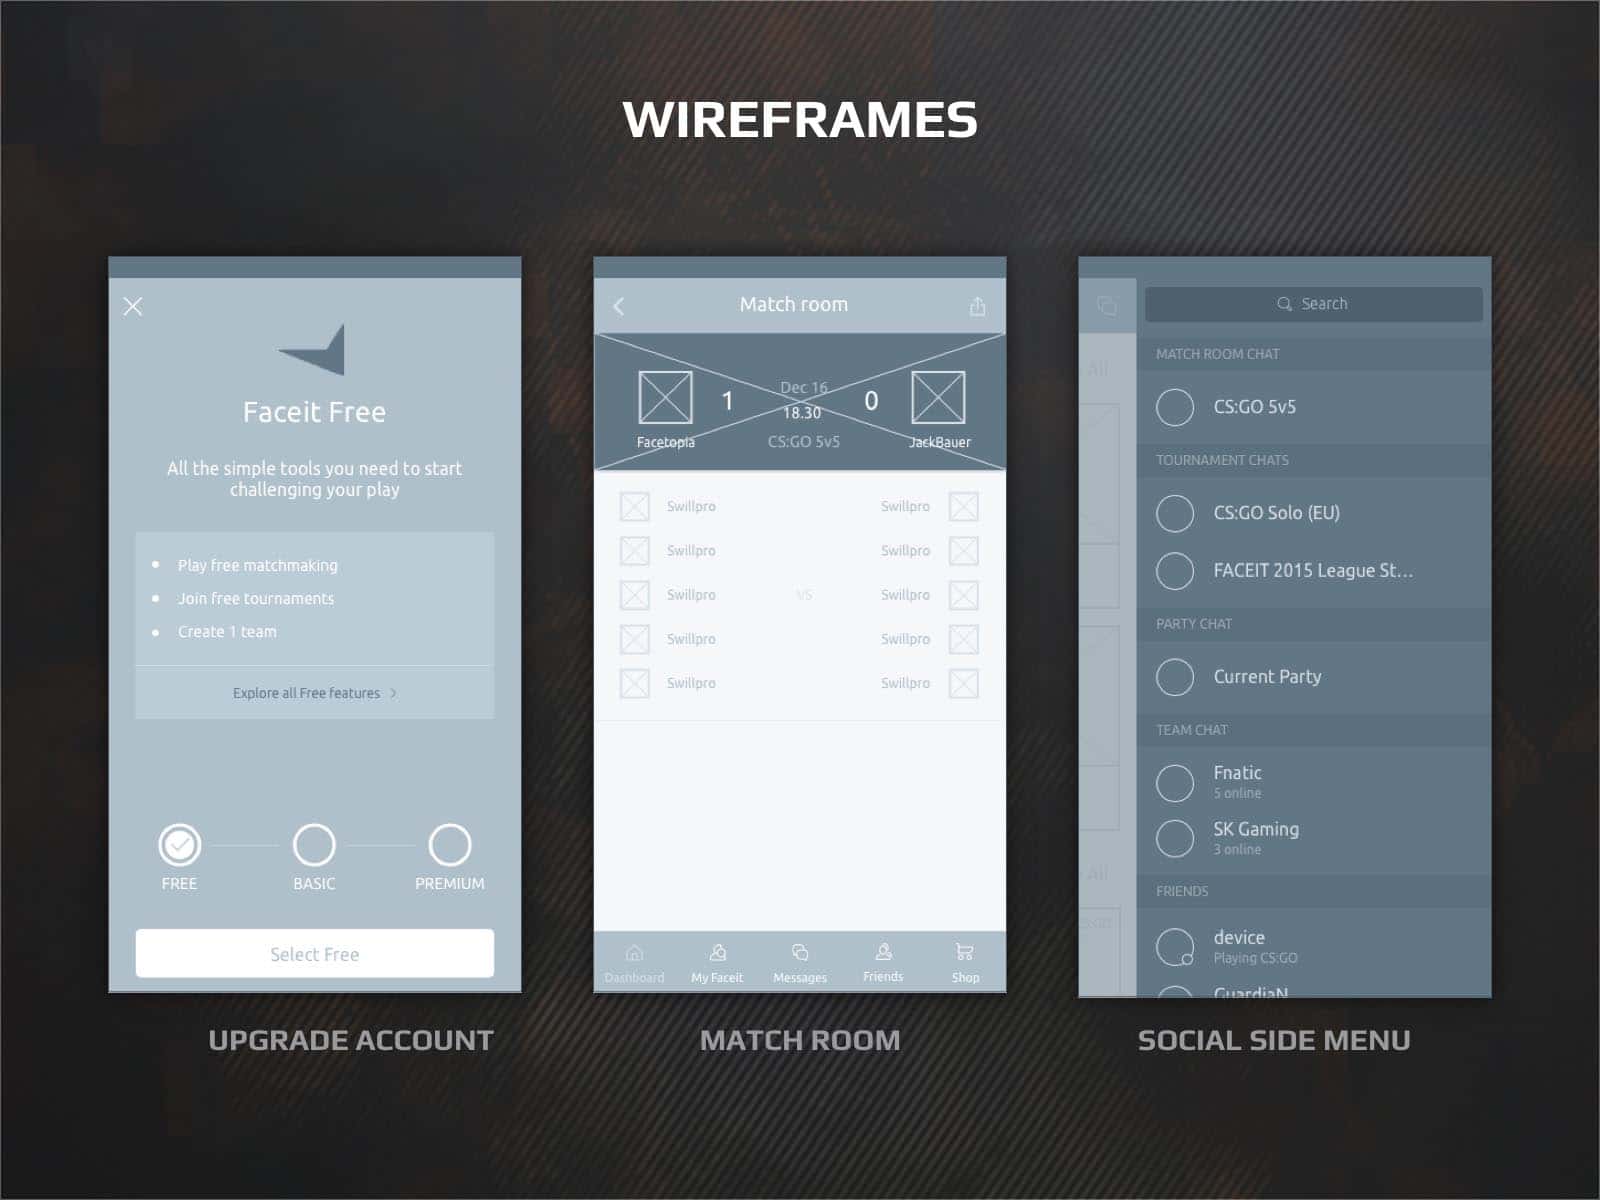 faceit app wireframes ux design and interactions